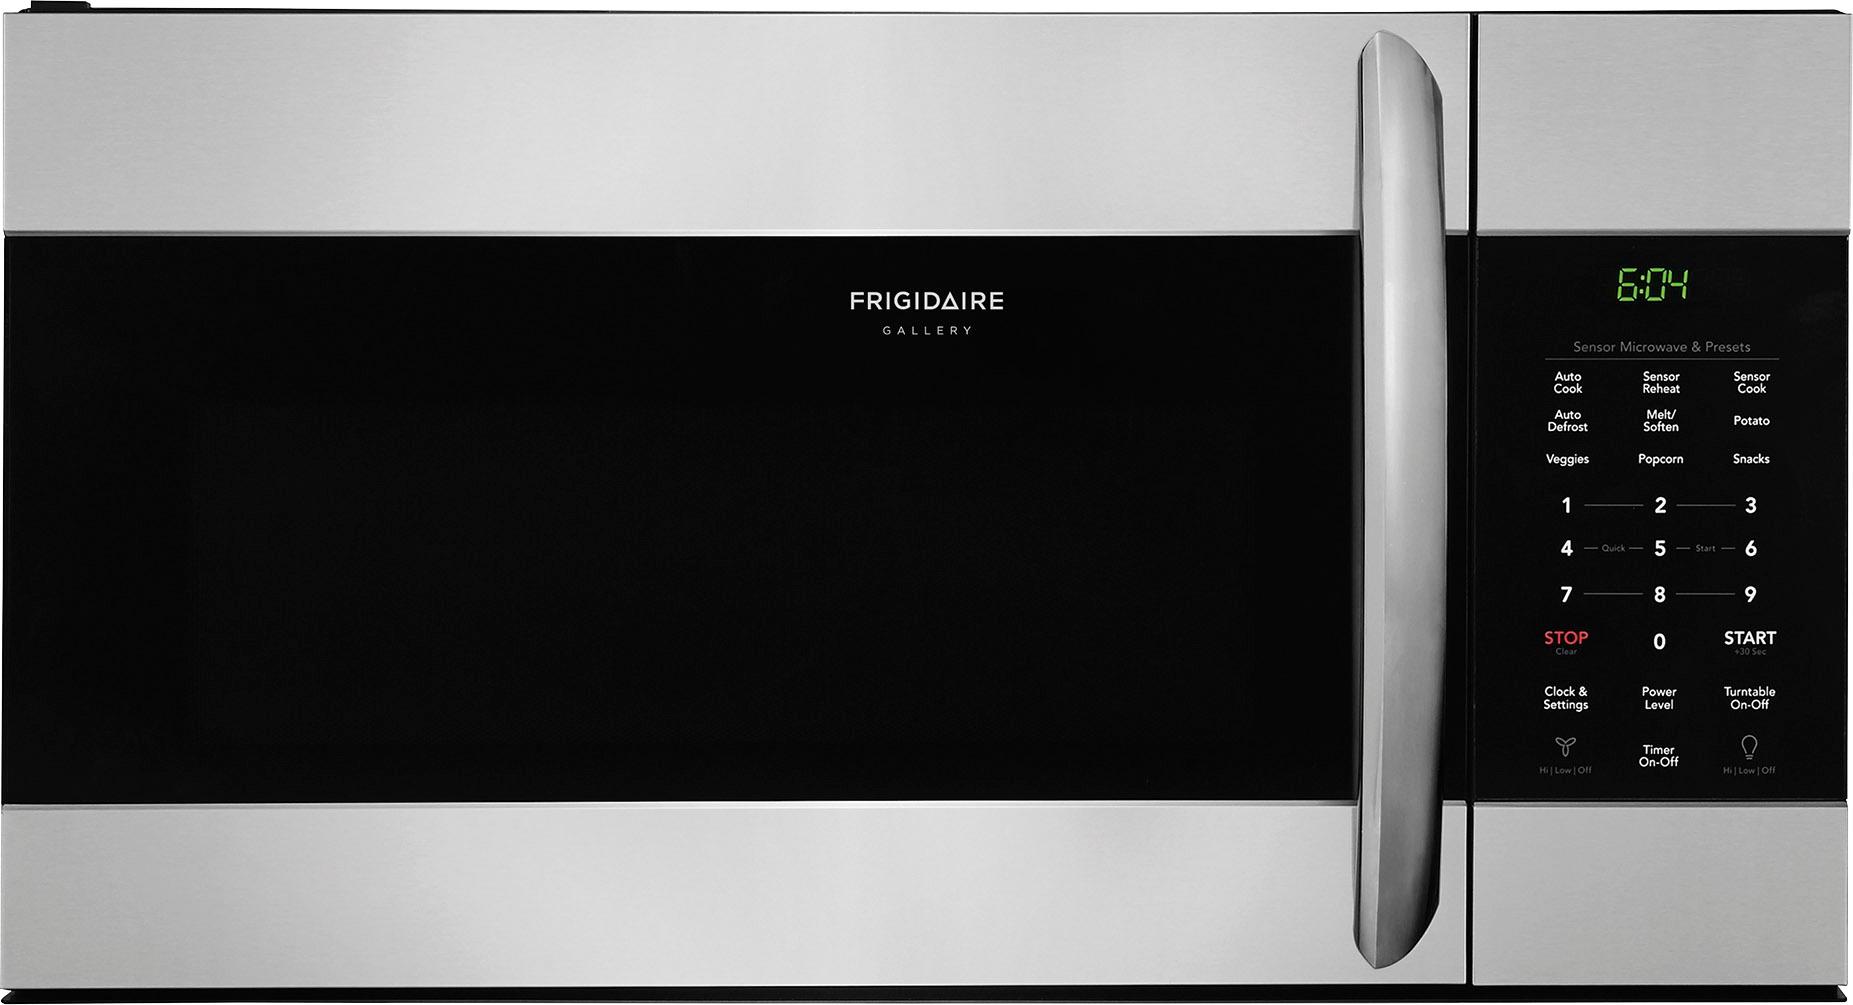 Best Buy: Frigidaire Gallery 1.7 Cu. Ft. Over-the-Range Microwave with